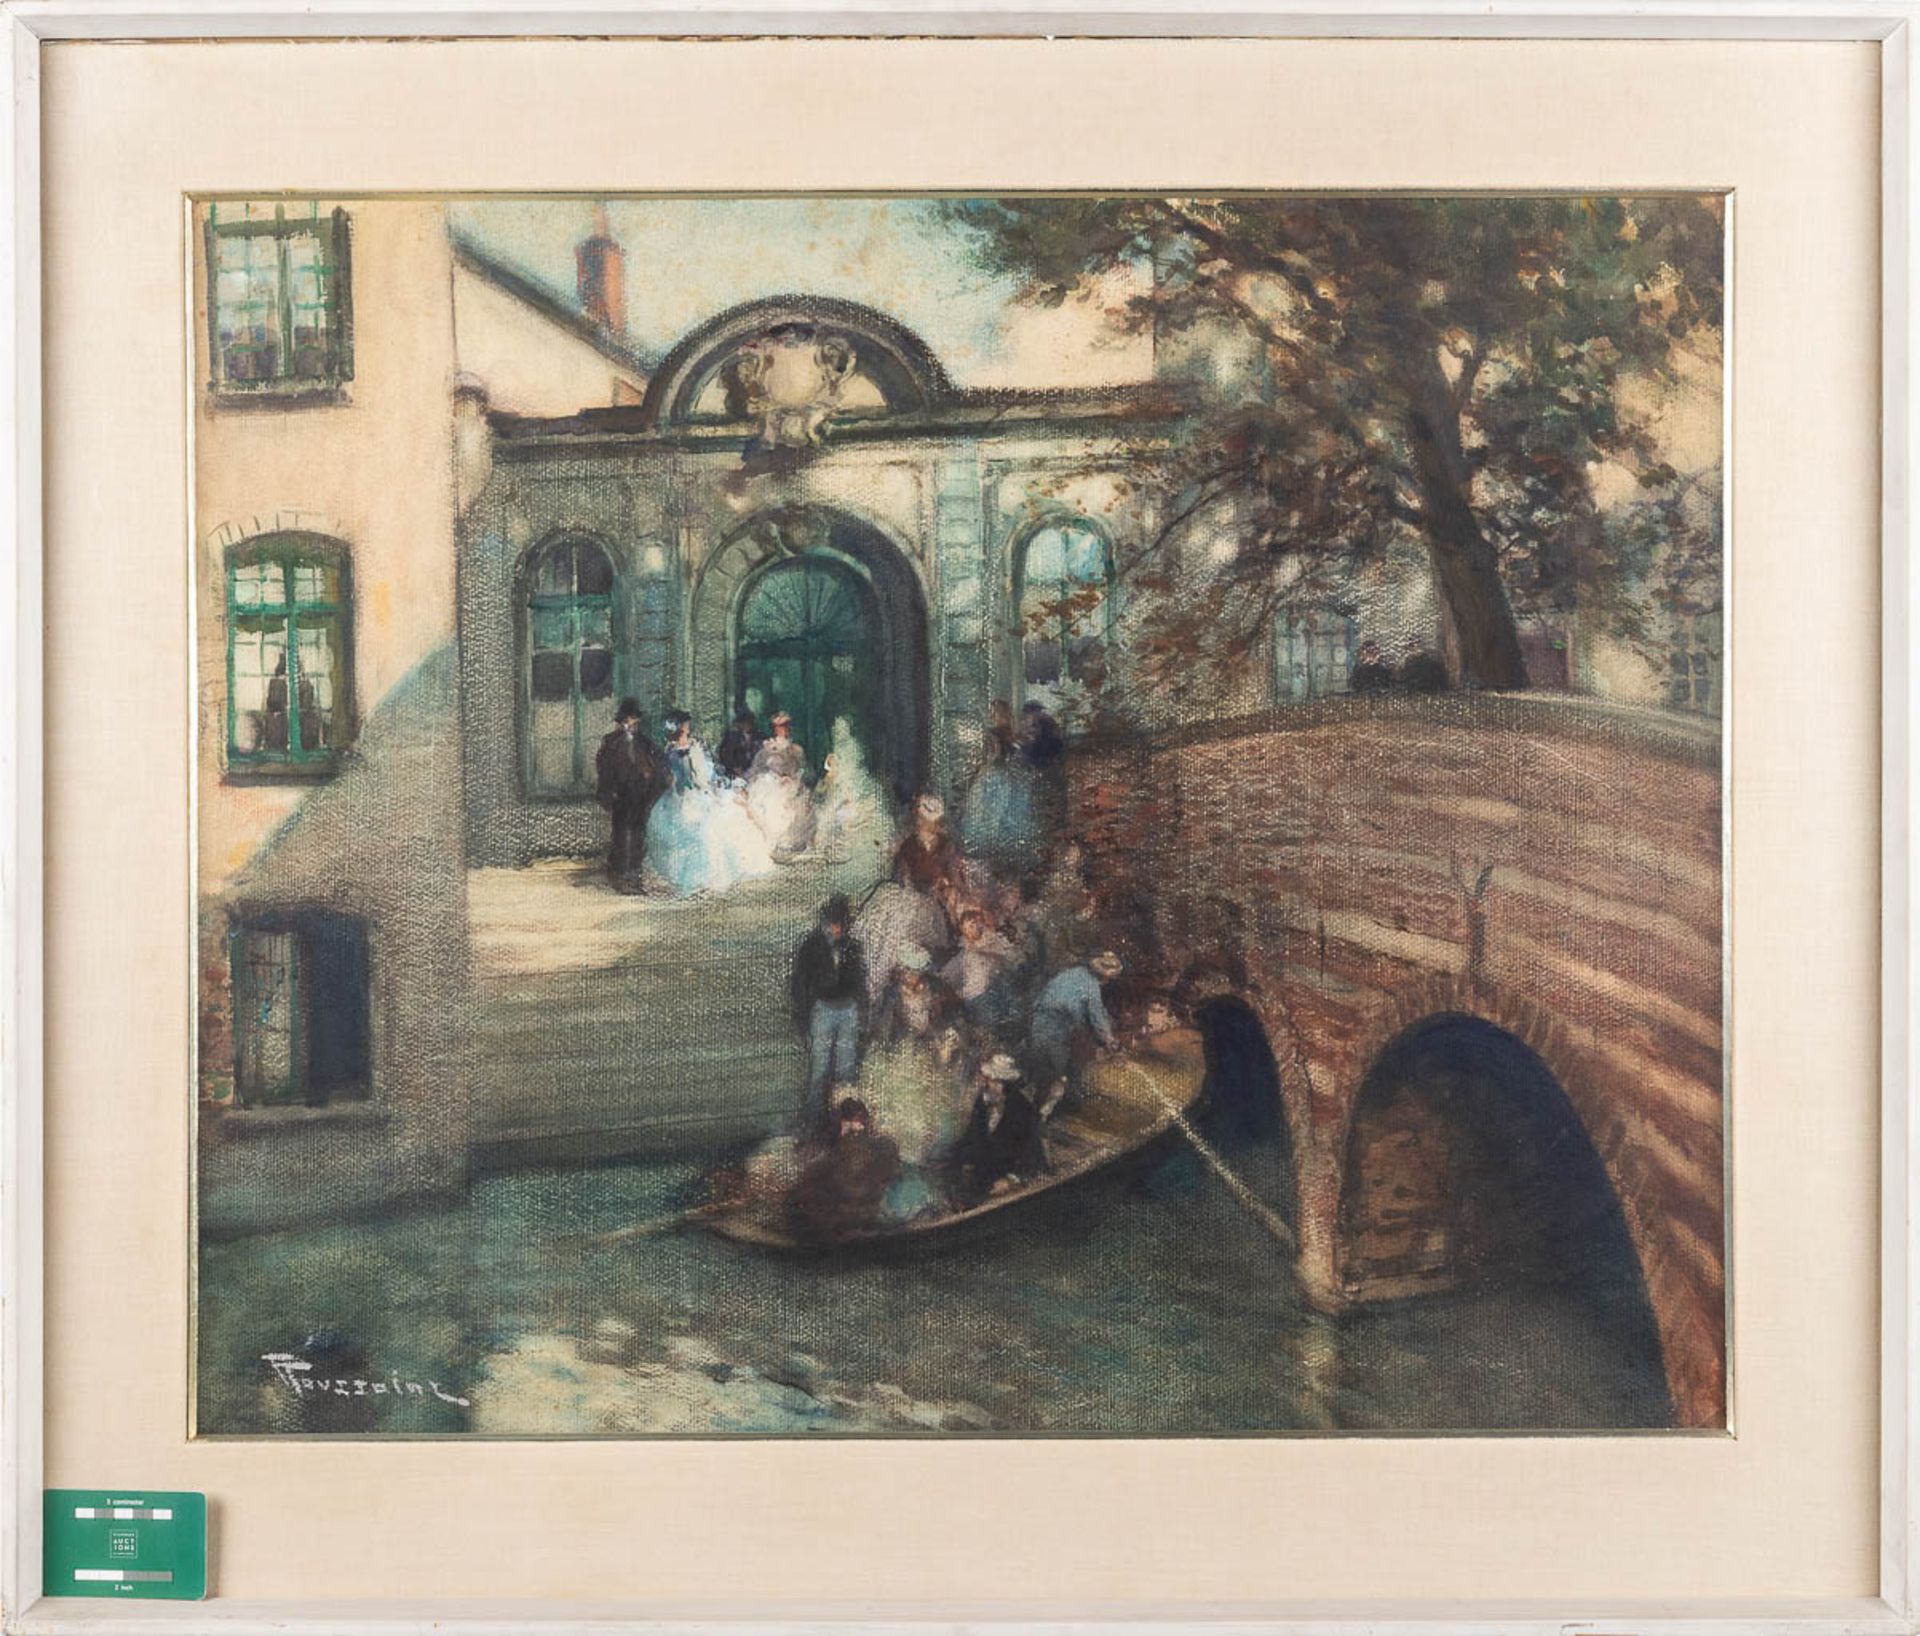 Fernand TOUSSAINT (1873-1955/56) 'Wedding boatride' mixed media on board. (W: 80 x H: 65 cm) - Image 2 of 7